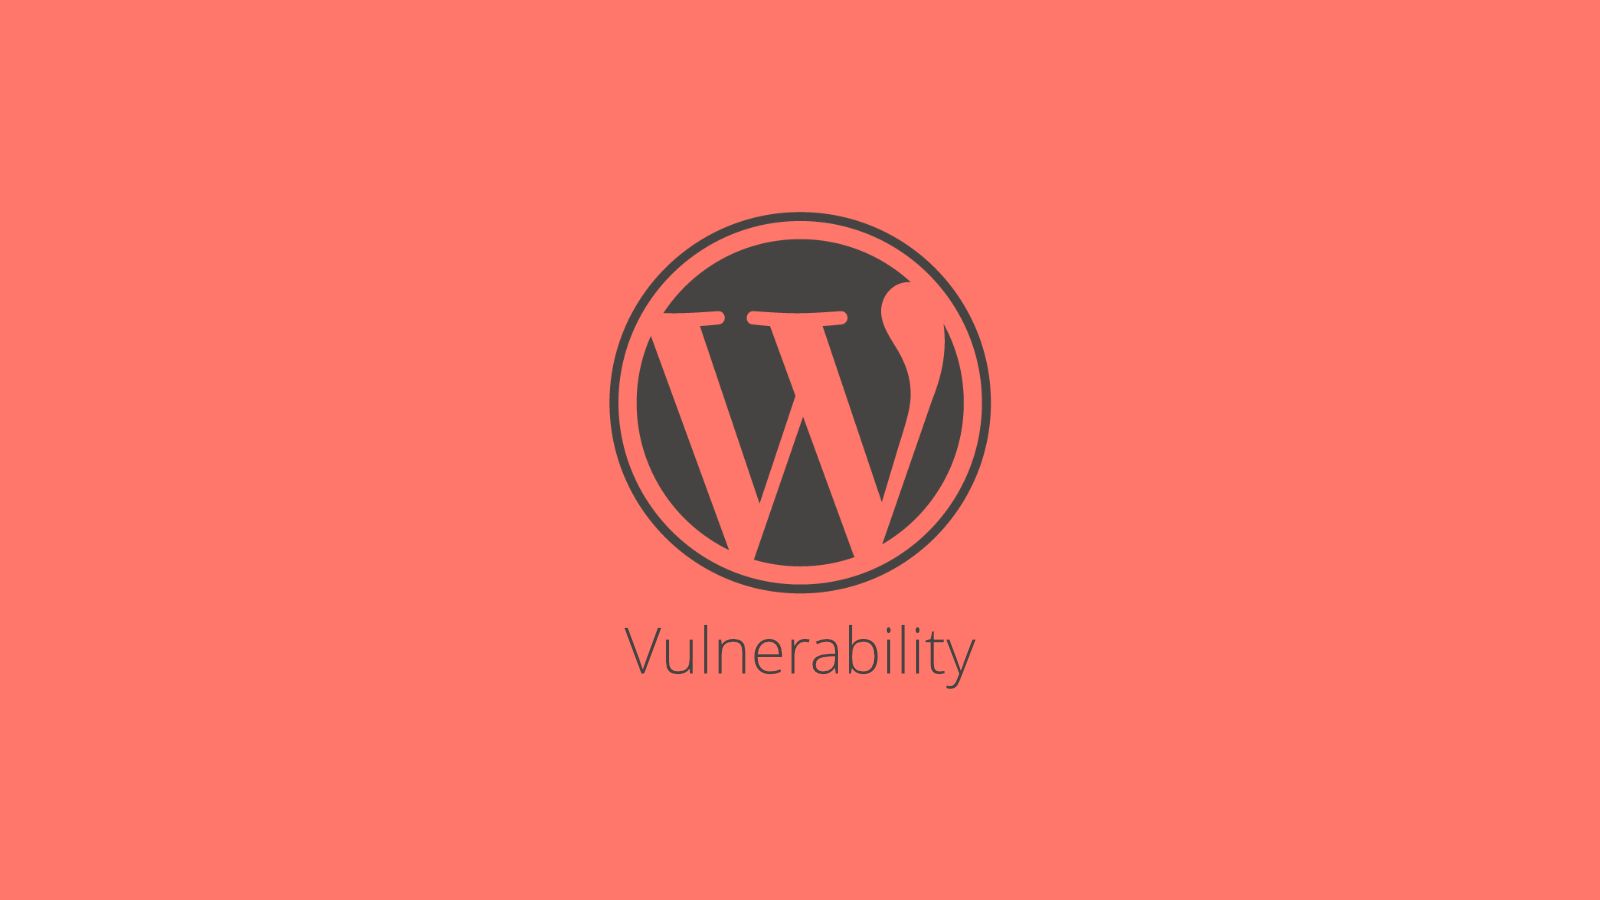 WordPress 4.7 and 4.7.1 vulnerability - Everything you need to know